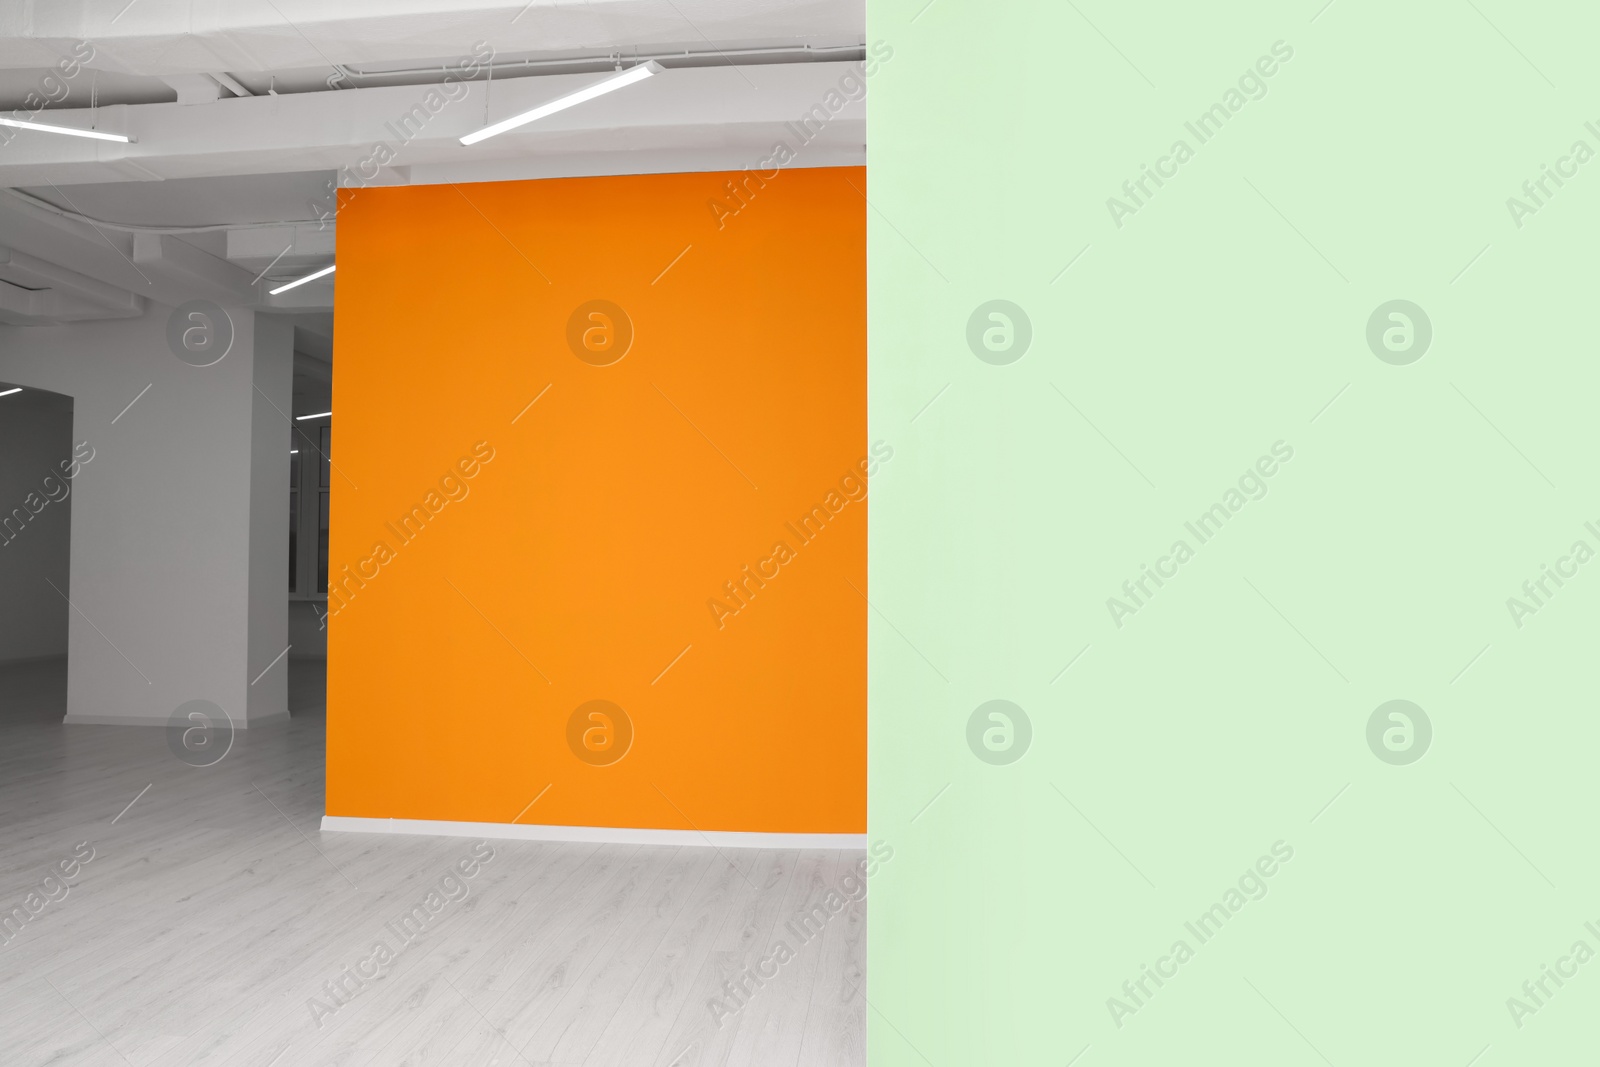 Photo of Empty office room with white and orange walls. Interior design